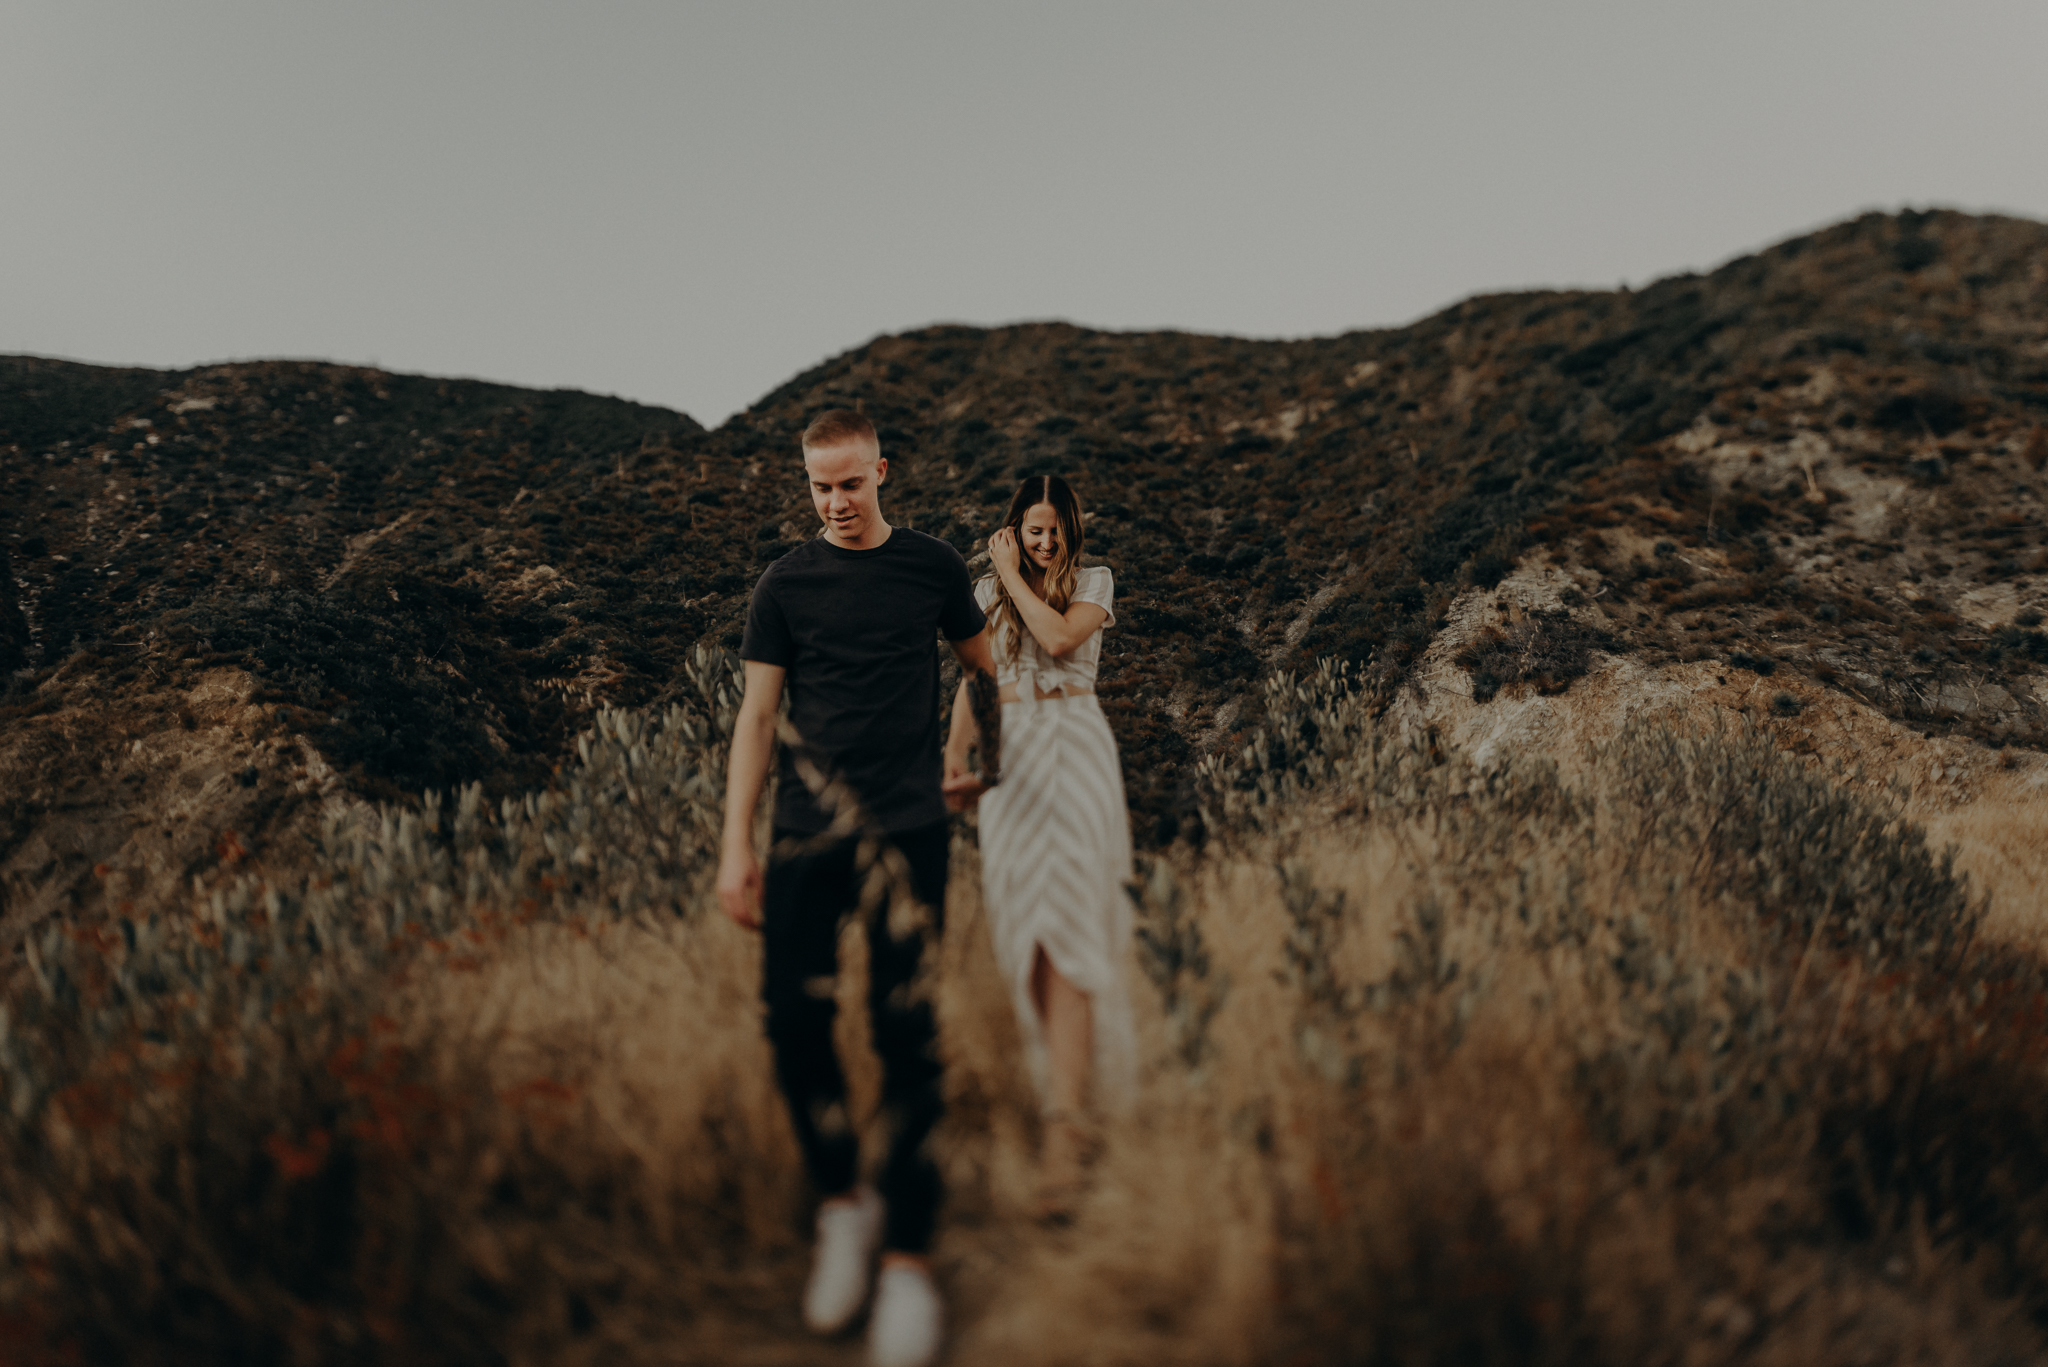 Isaiah + Taylor Photography - Los Angeles Forest Engagement Session - Laid back wedding photographer-033.jpg